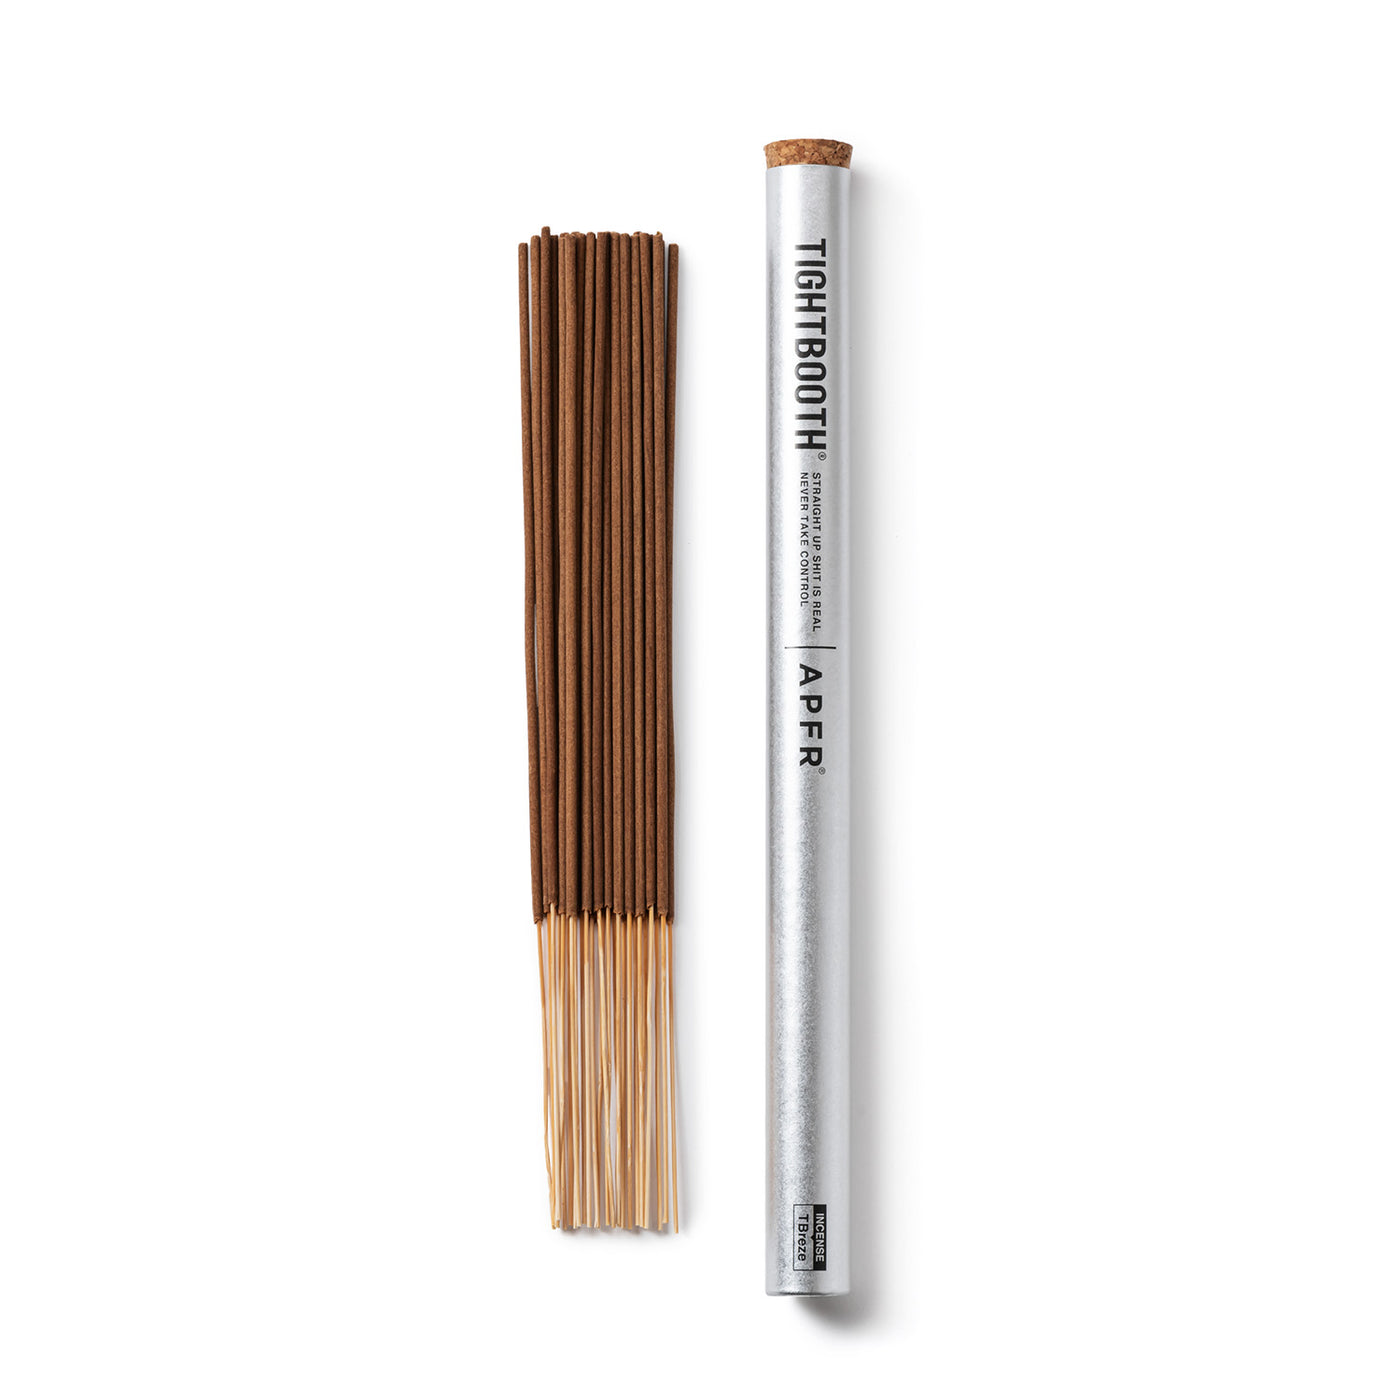 INCENSE STICK - TIGHTBOOTH